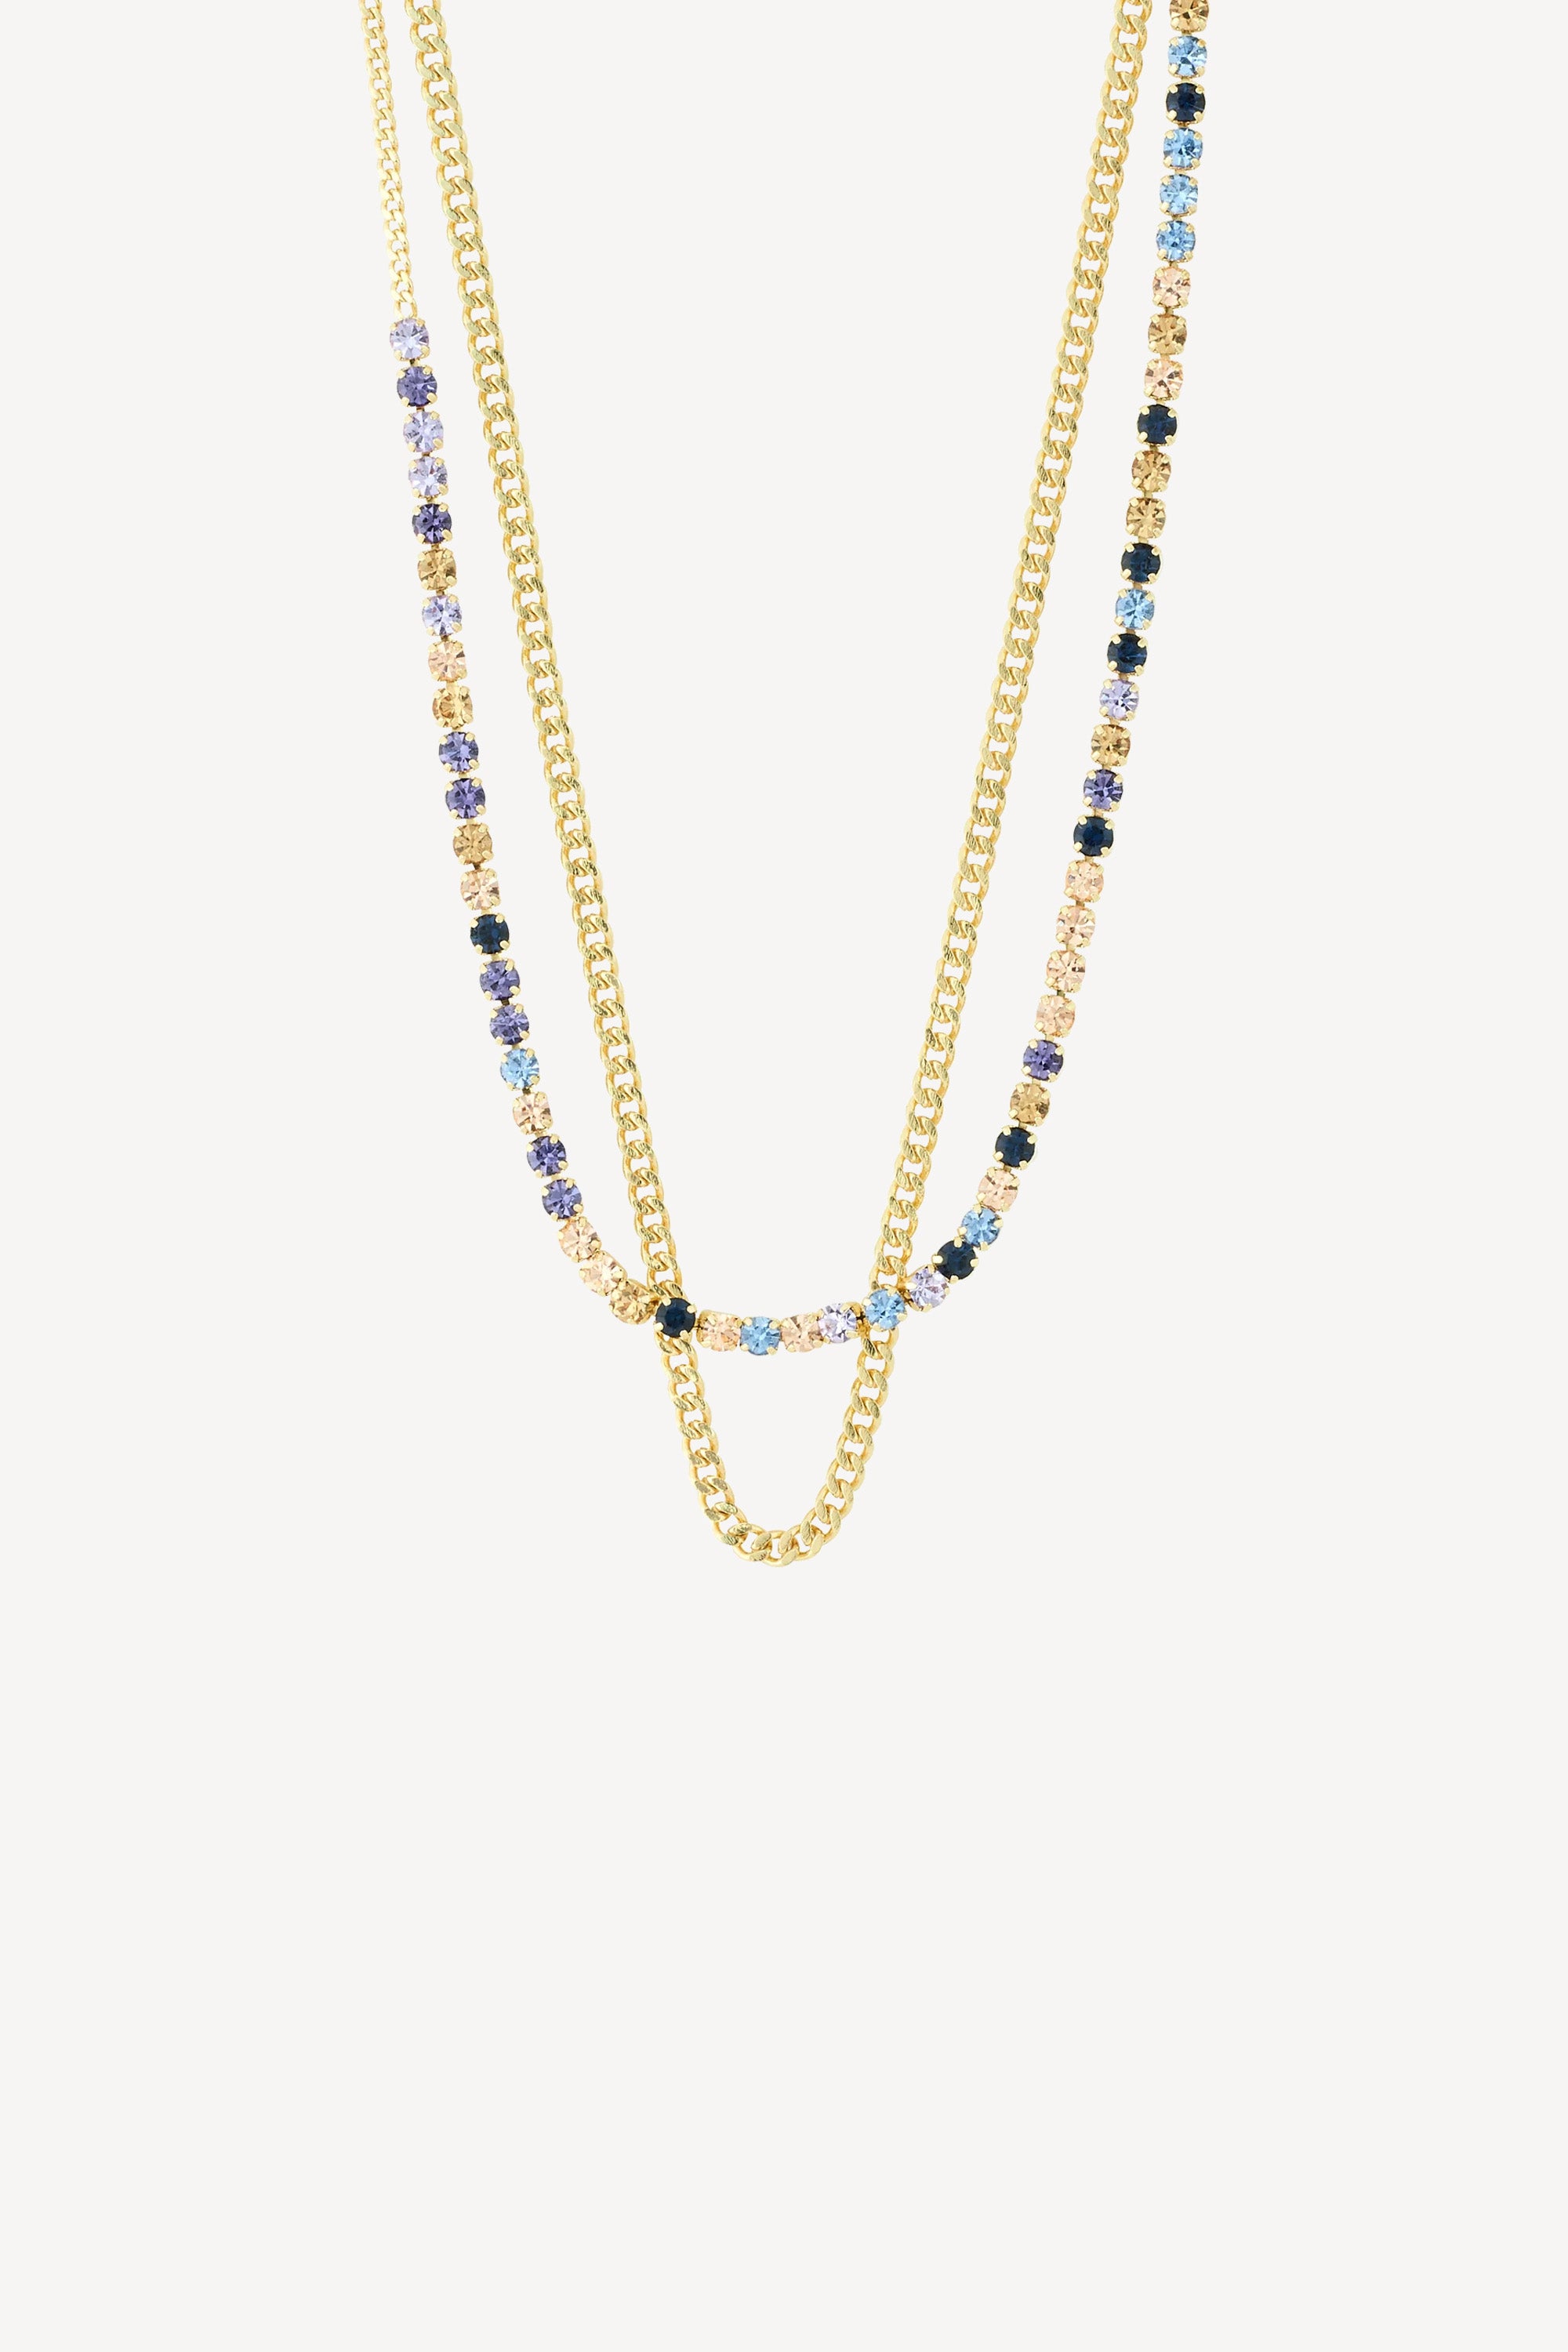 Reign Necklaces 2-in-1 Set Gold